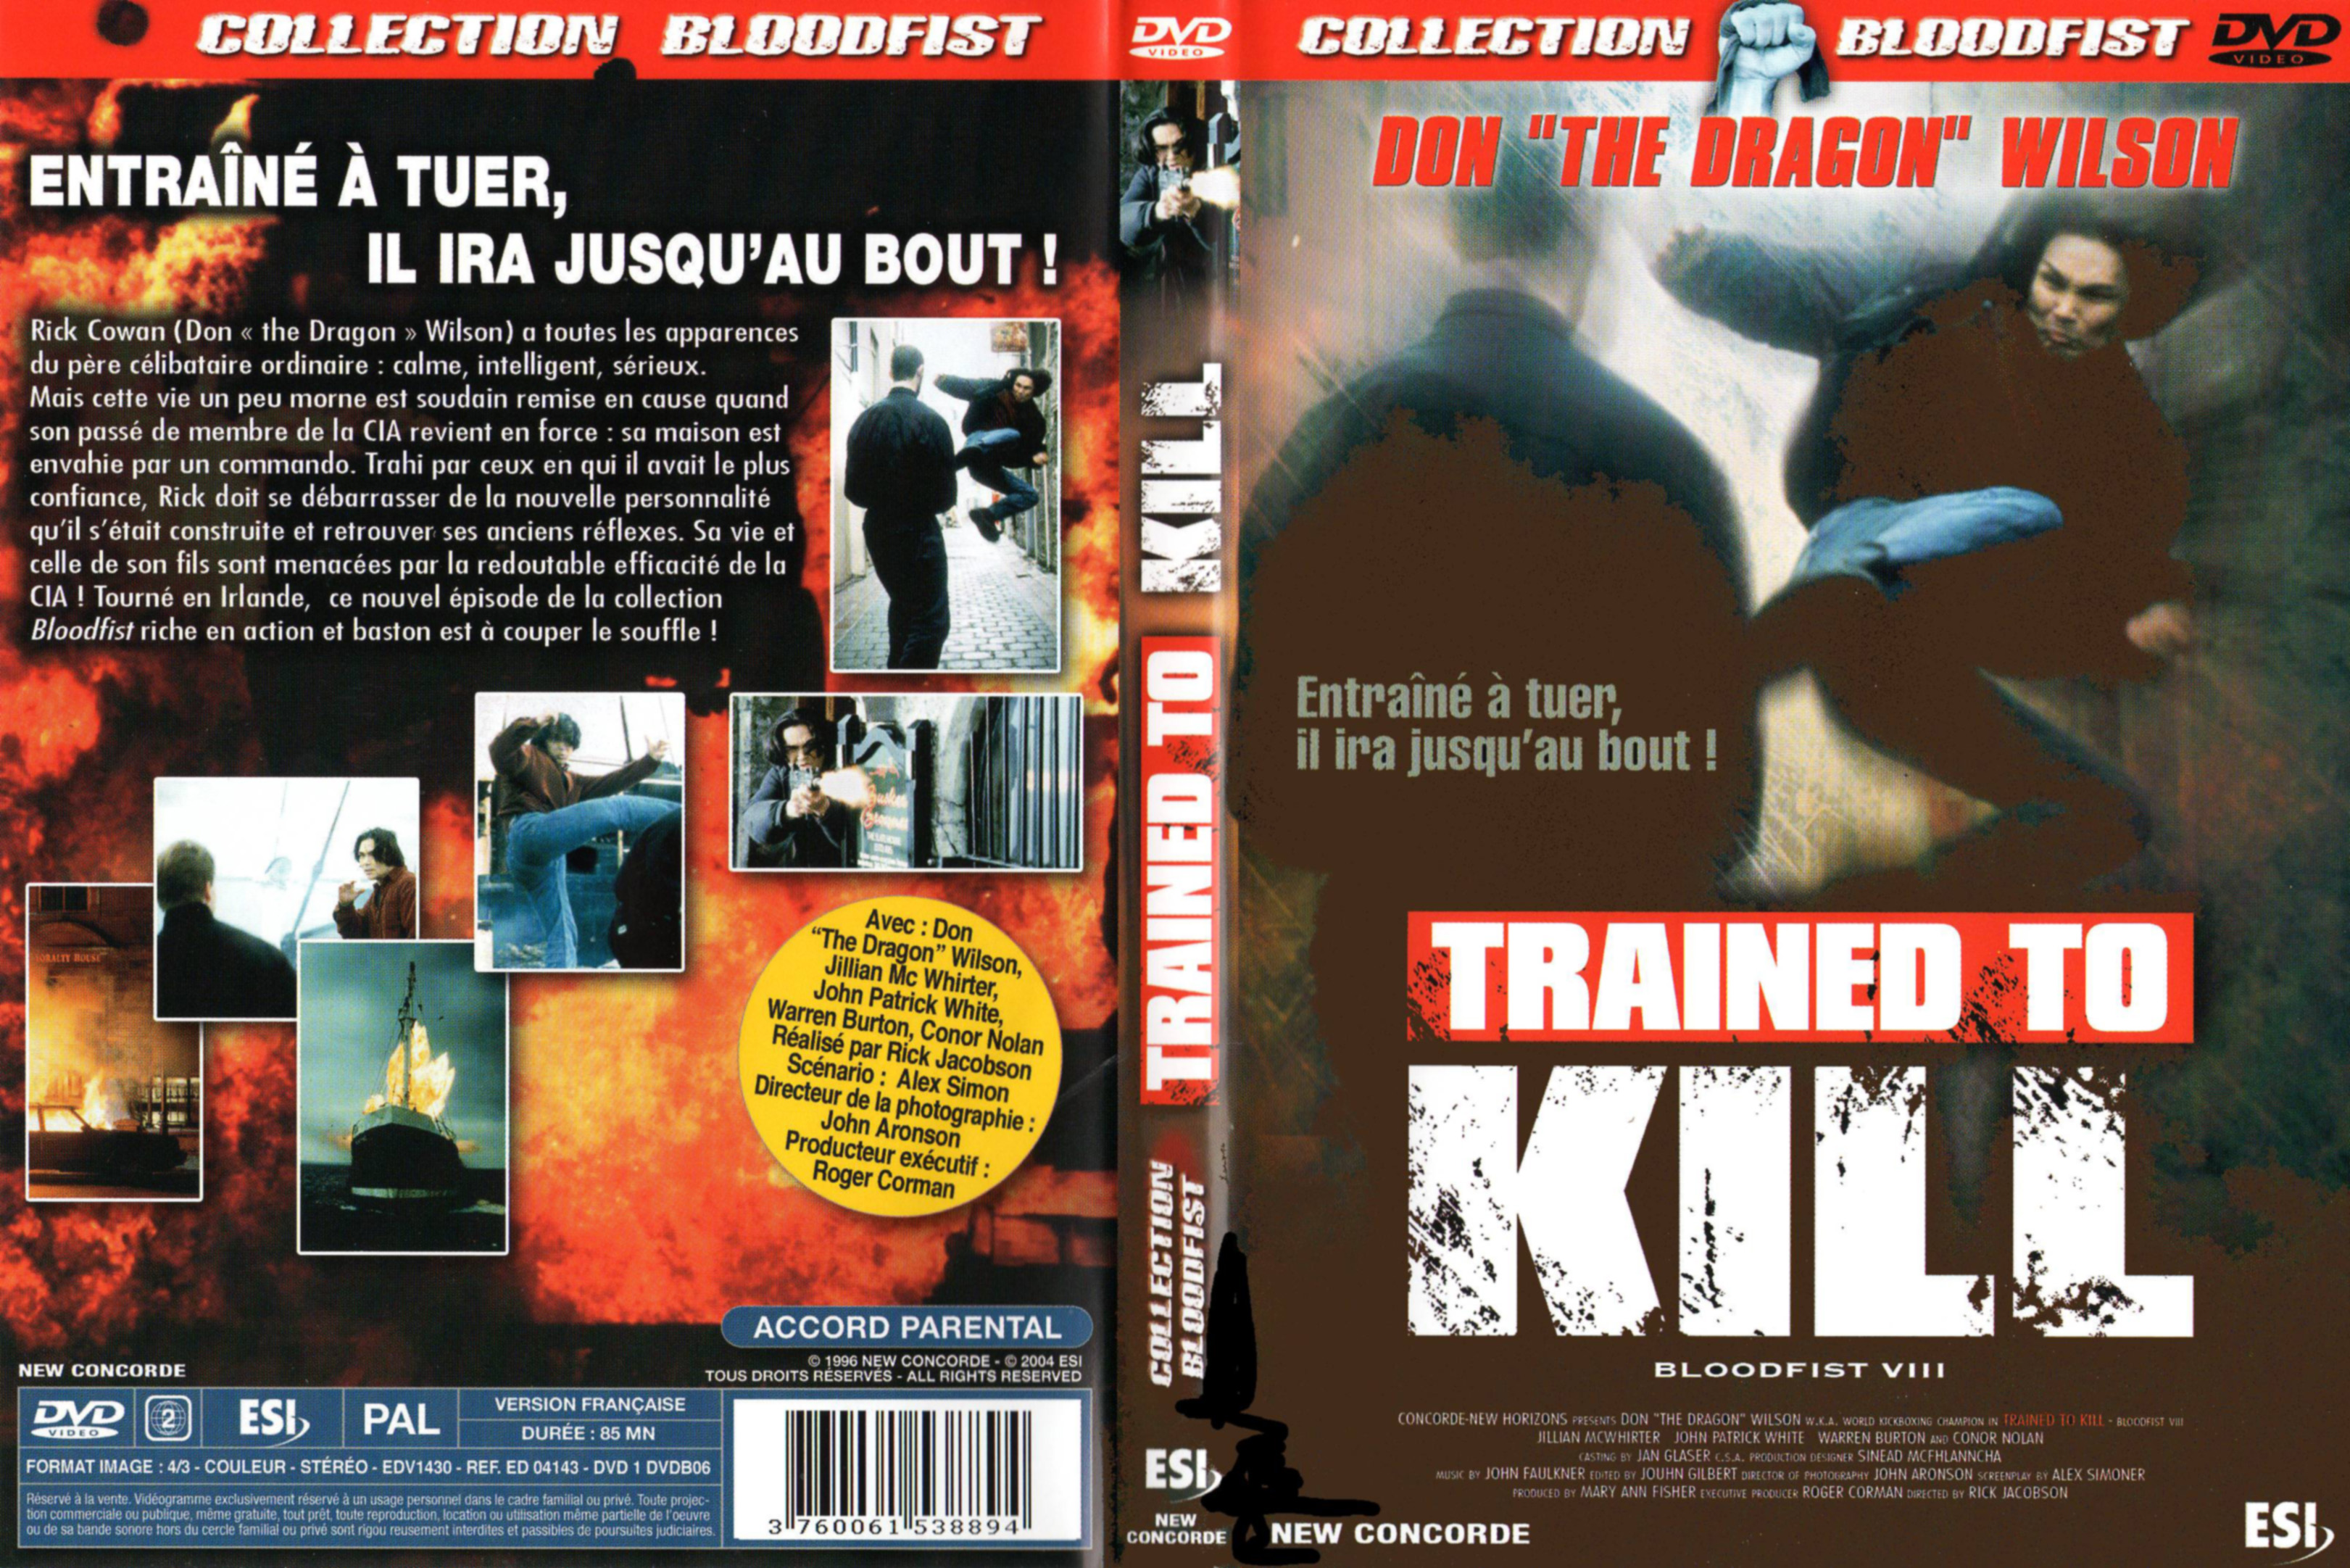 Jaquette DVD Trained to kill